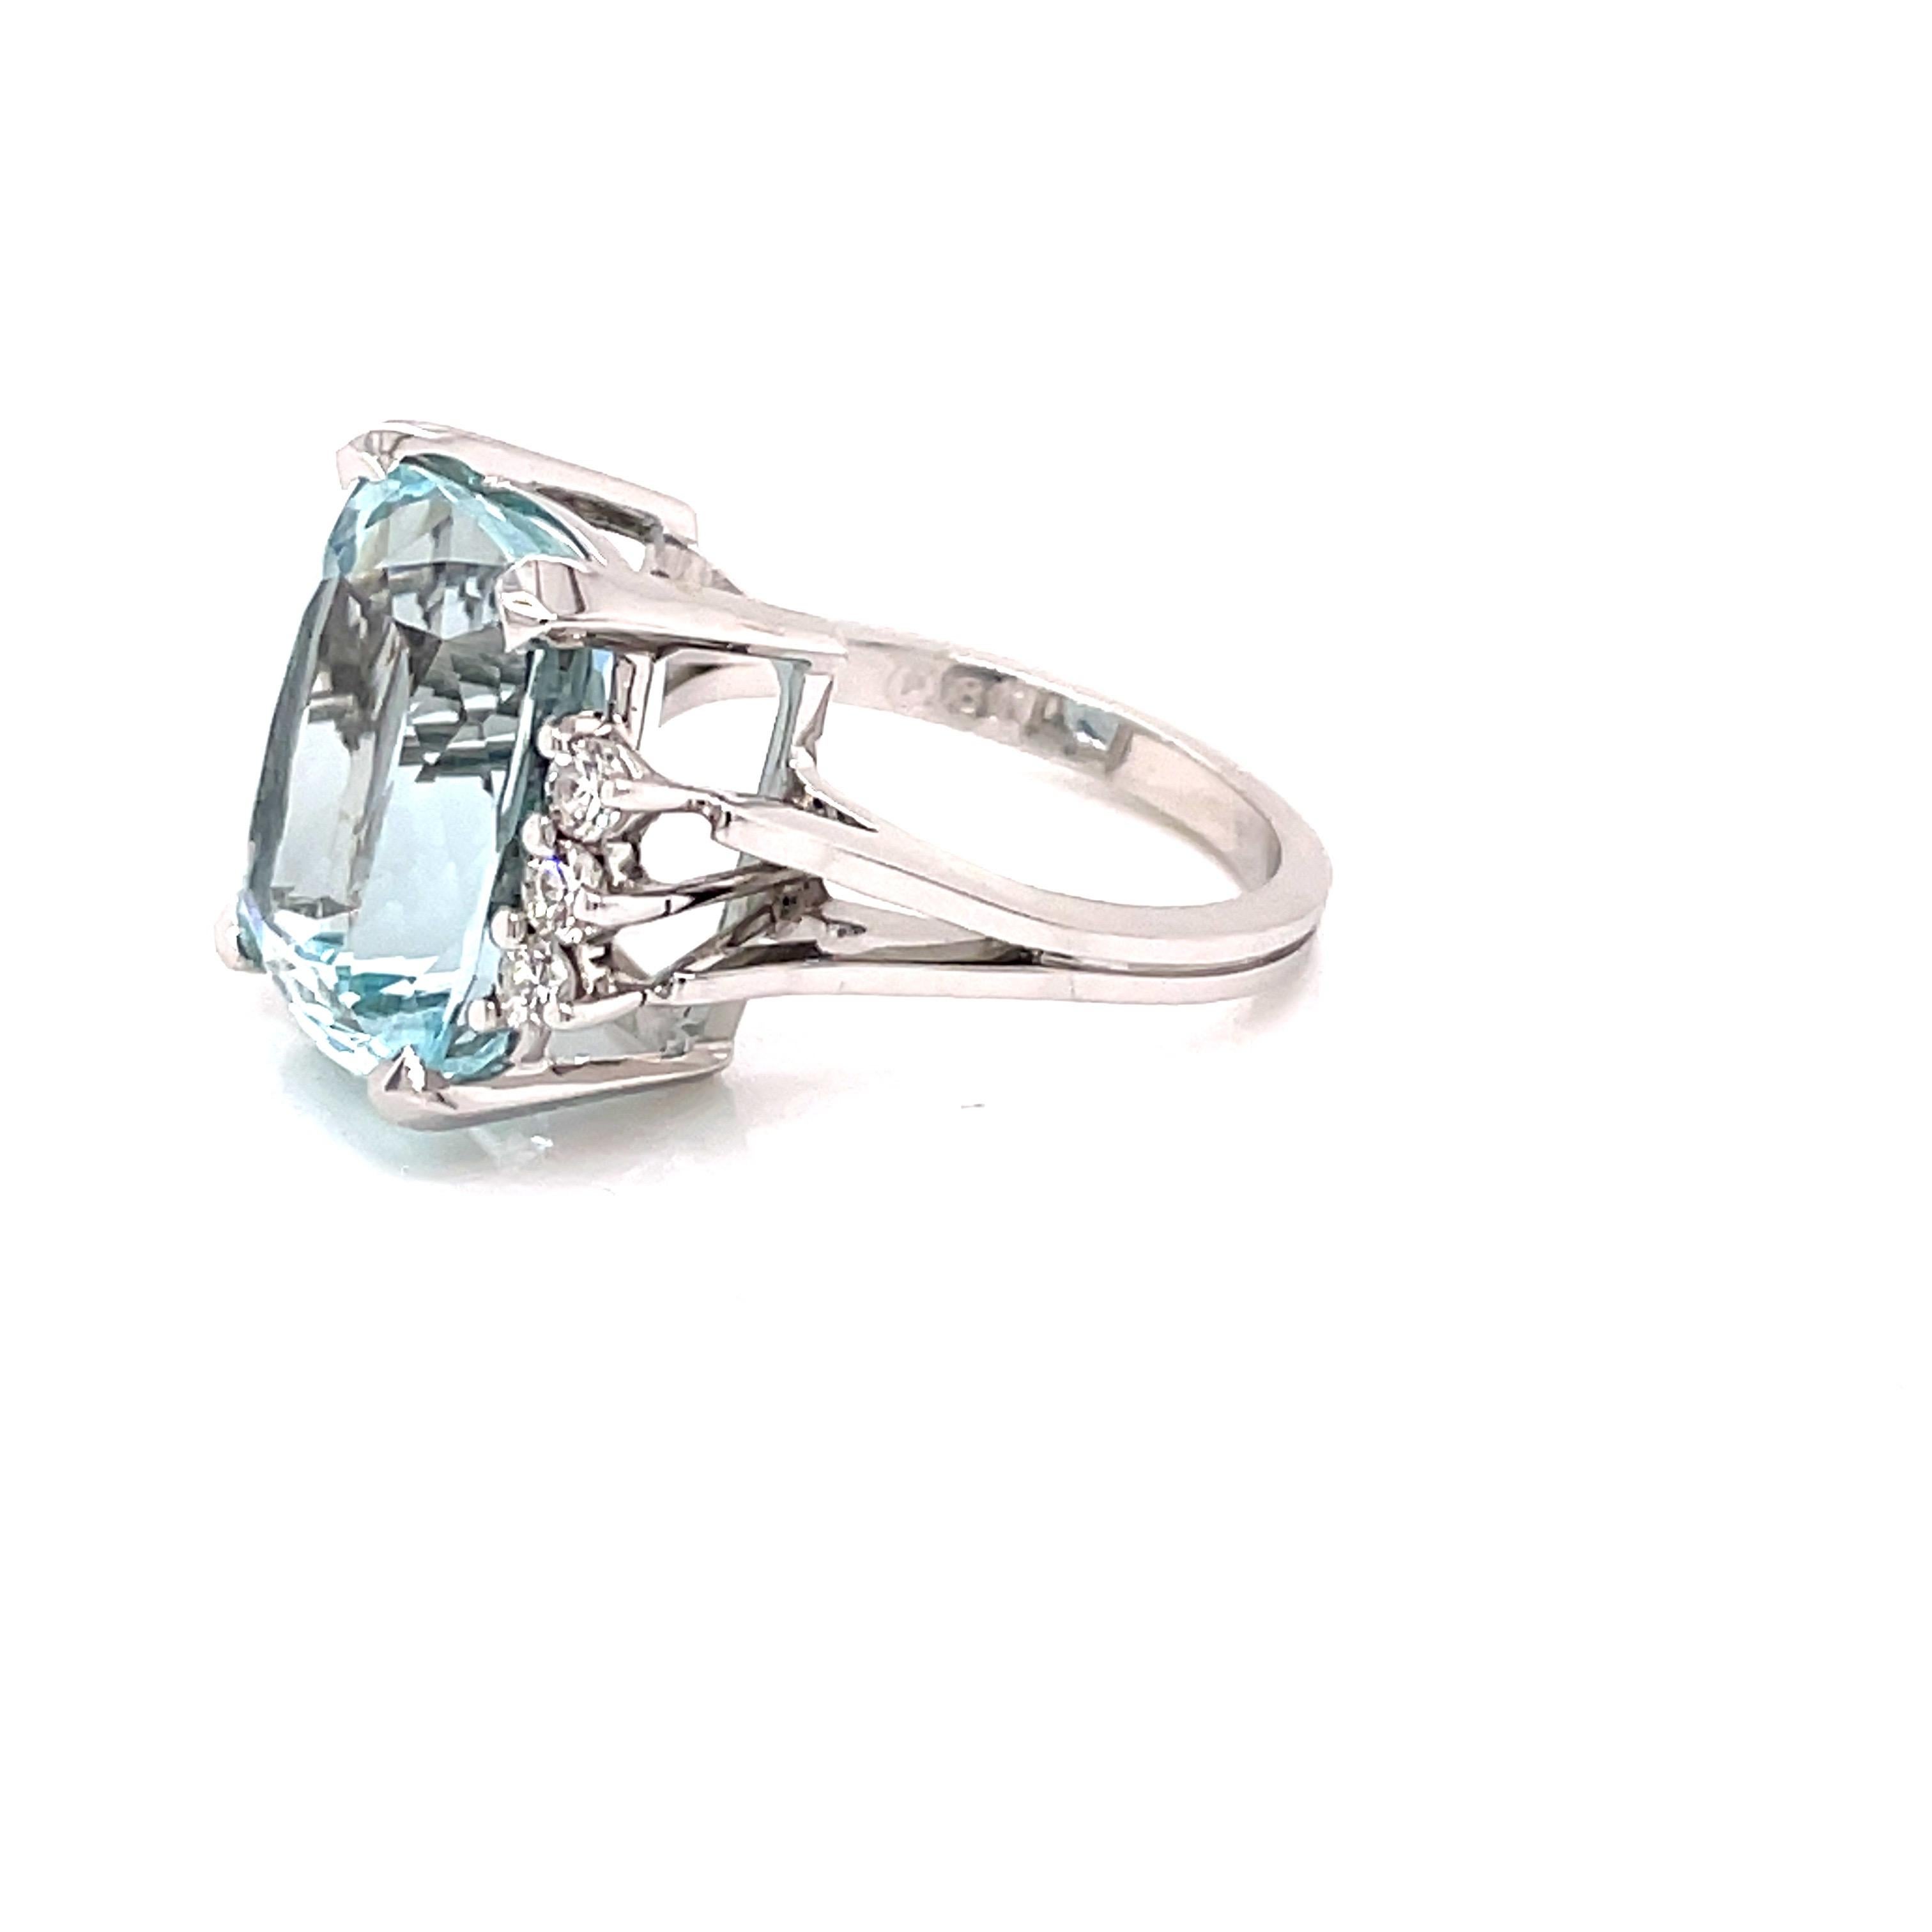 Vintage 1960's 10ct Cushion Cut Aquamarine Ring with Diamonds For Sale 2